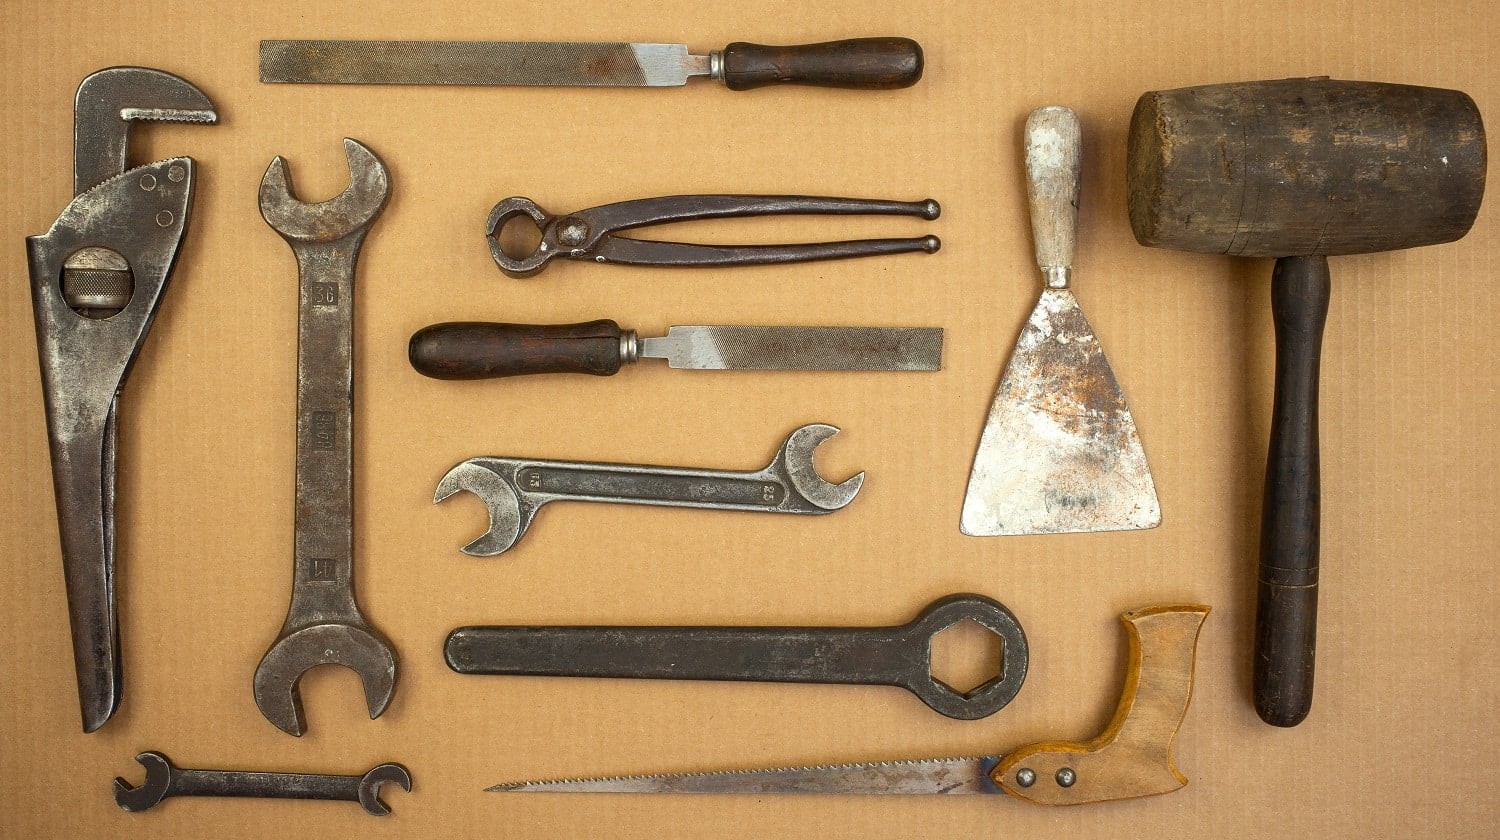 View of old set tools. Hammer, putty, knife, pliers, saw, file, wrench